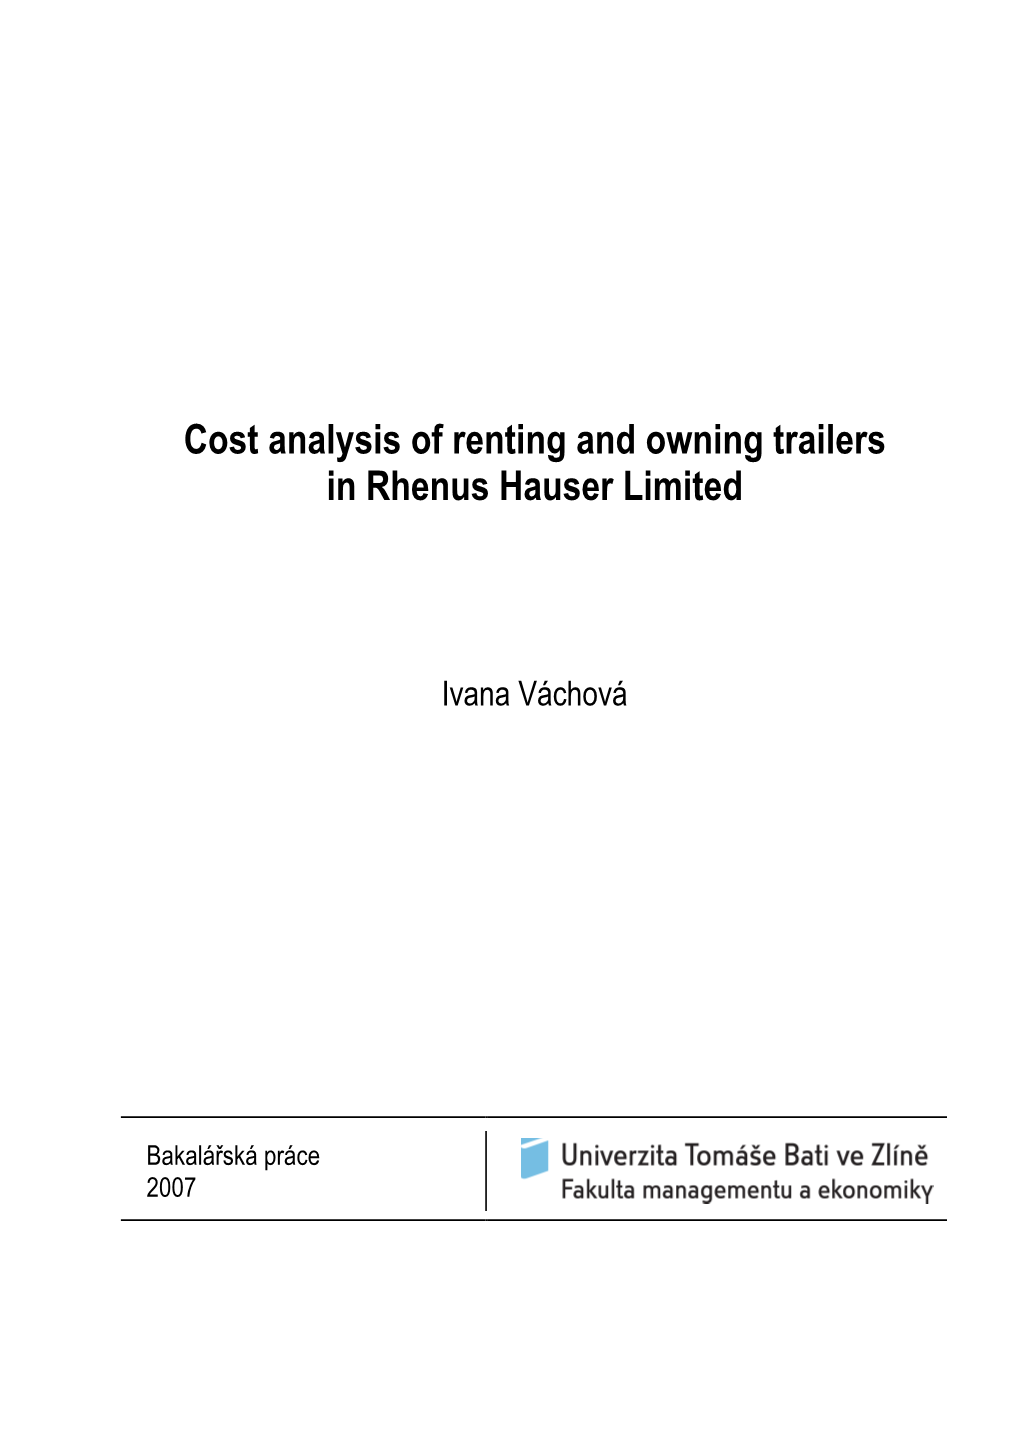 Cost Analysis of Renting and Owning Trailers in Rhenus Hauser Limited